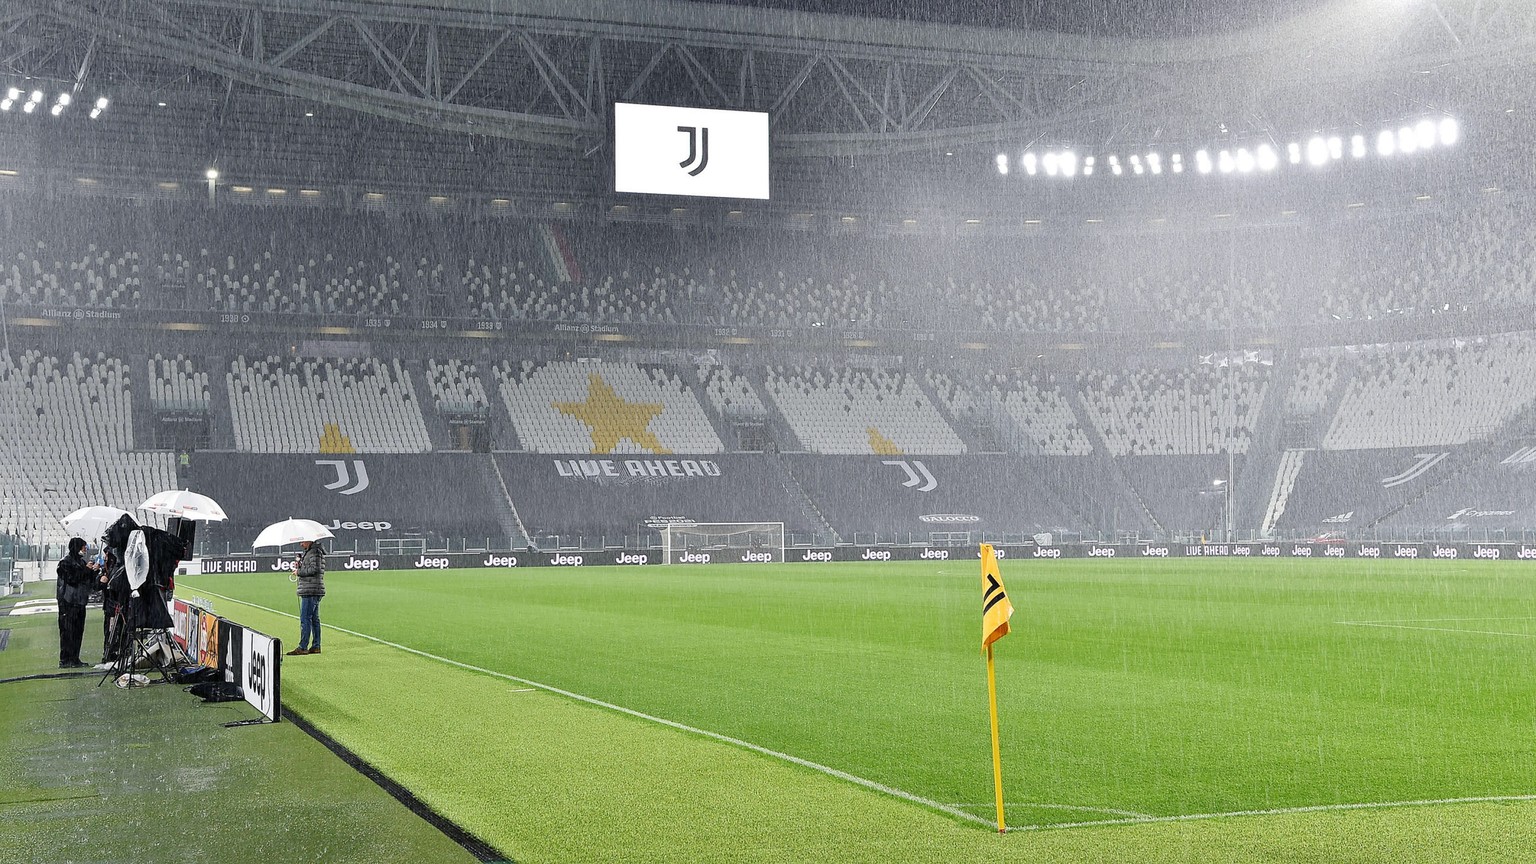 epa08721074 An interior view of the Juventus Stadium prior to the Italian Serie A soccer match Juventus FC vs SSC Napoli in Turin, Italy, 04 October 2020. At the stadium there are Juventus and the ref ...